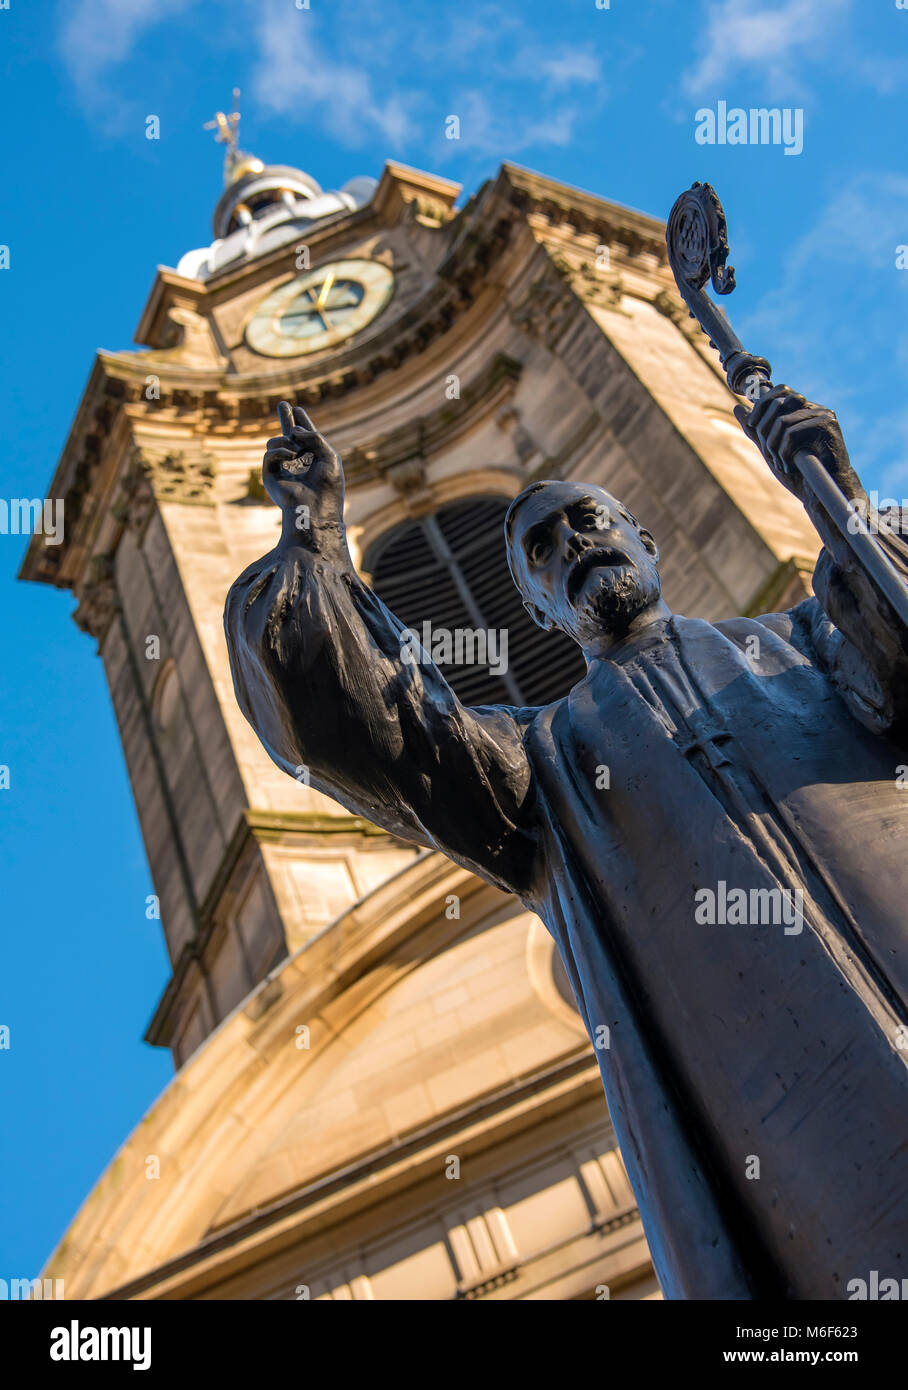 The bronze statue of Charles Gore, 1st Bishop of Birmingham stands outside St. Philip's Cathedral, Birmingham, West Midlands, England, Europe Stock Photo